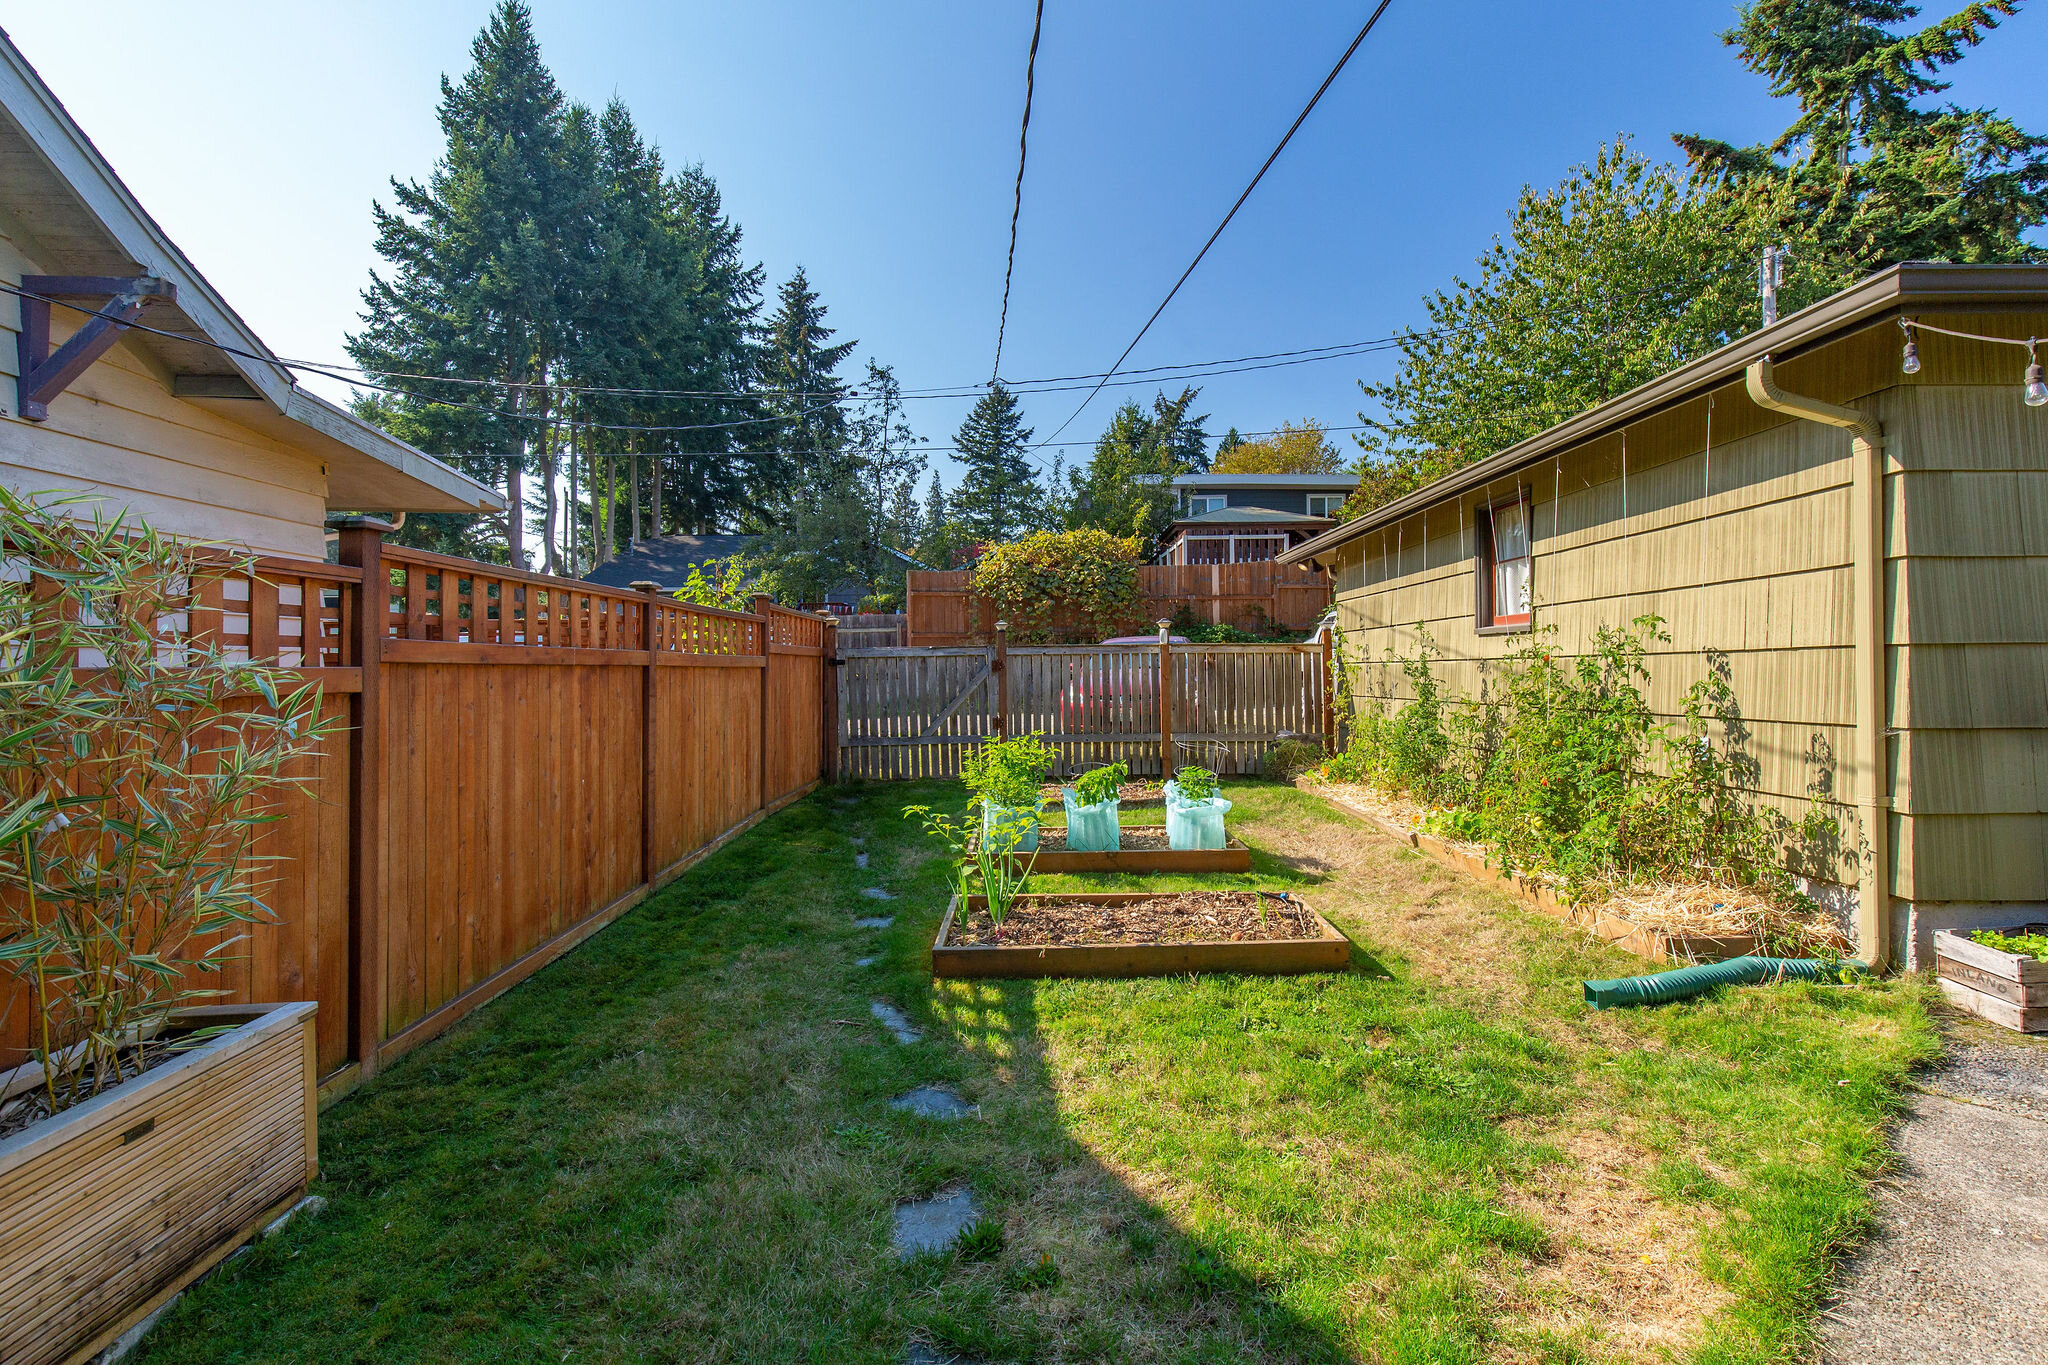  A gardener’s paradise with garden beds in both the front and backyard. Also the back yard is fully-fenced and ready for pets to play in. 